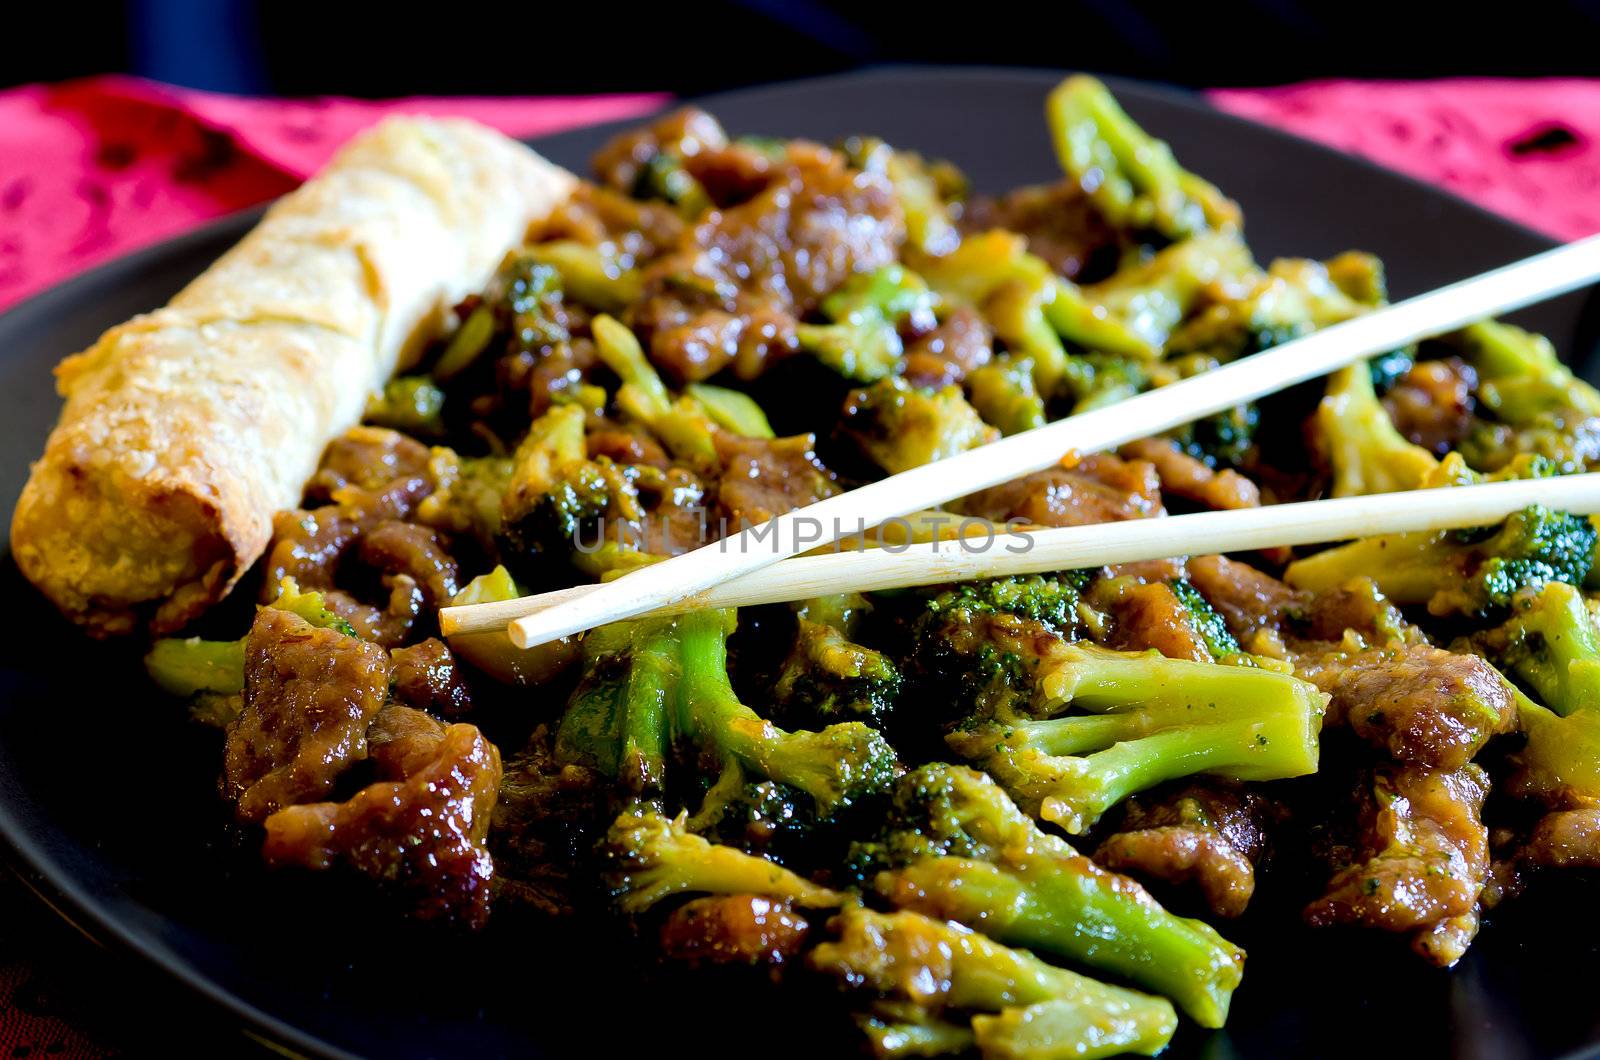 Beef with Broccoli and Spring Roll by dehooks